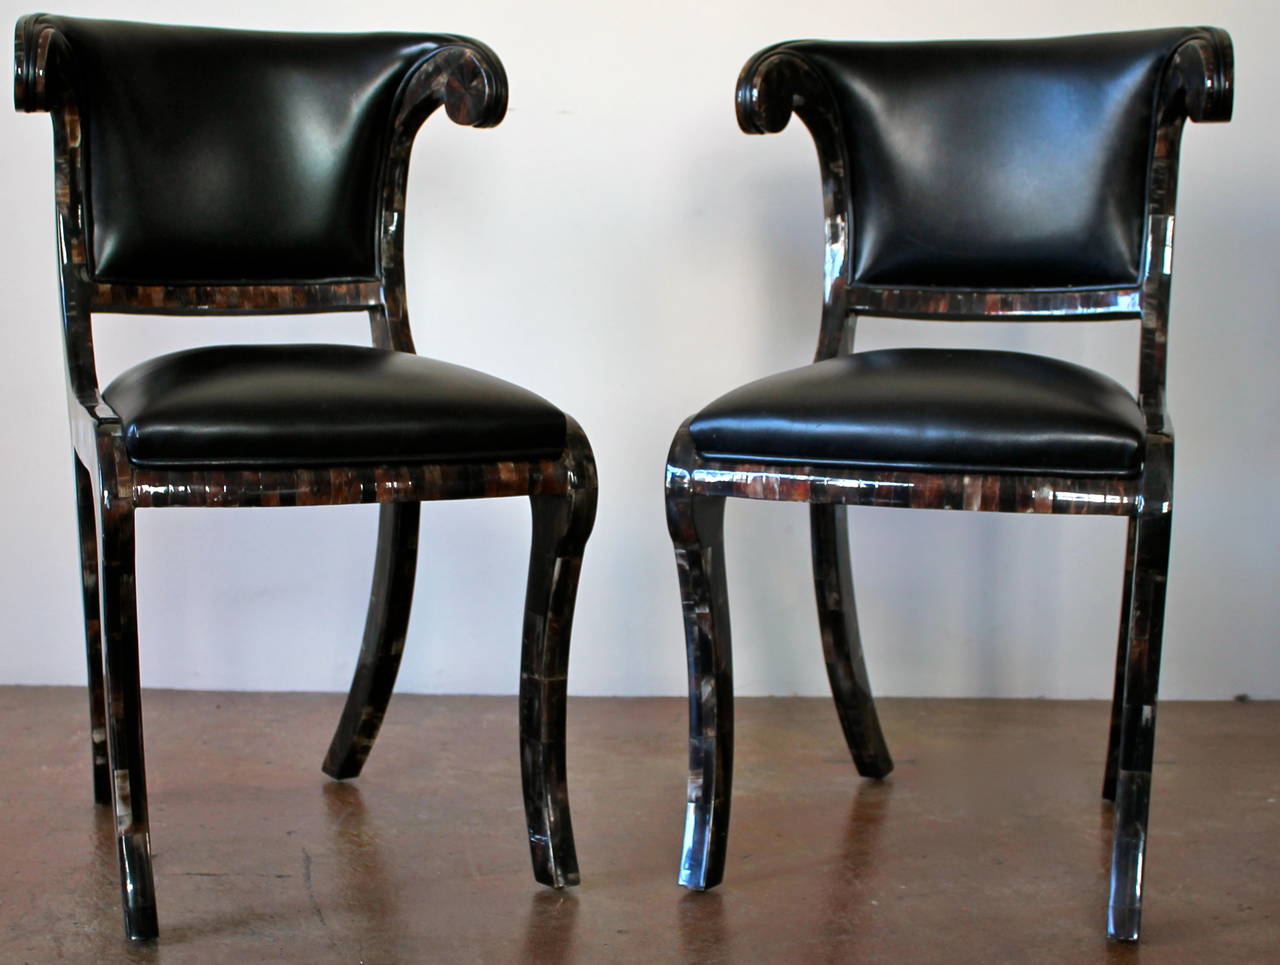 Beautiful pair of tessellated and black leather sculptural chairs.
By Enrique Garcel.
Made in Colombia in 1970s.